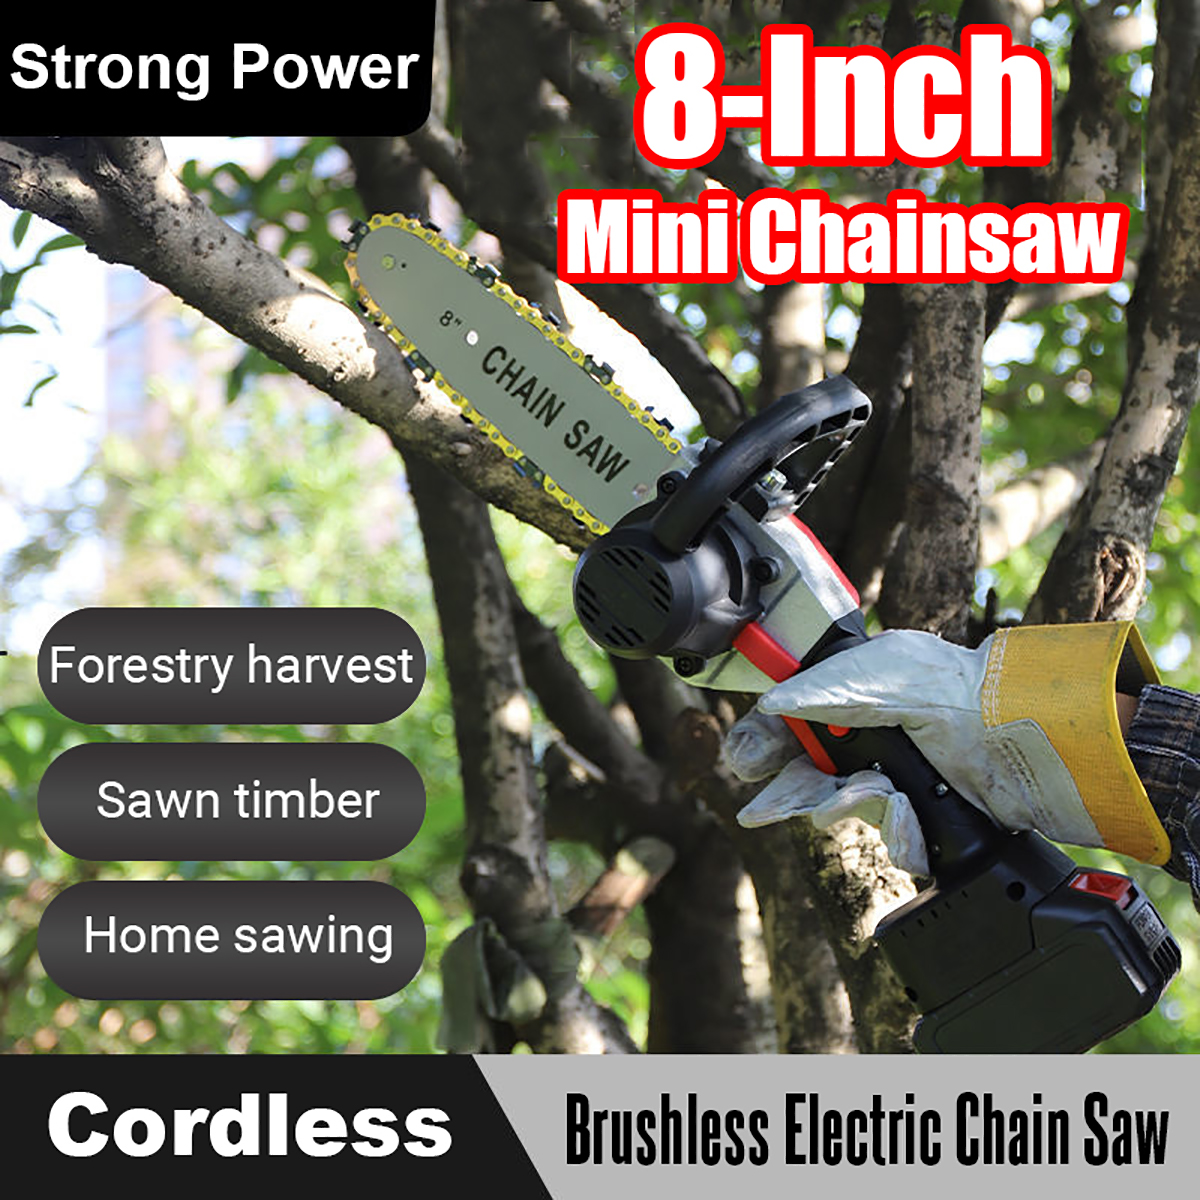 Mini-Chainsaw-8-Inch-21V-Portable-Brushless-Cordless-Electric-Chain-Saw-Handheld-Pruning-Shears-Chai-1795044-1